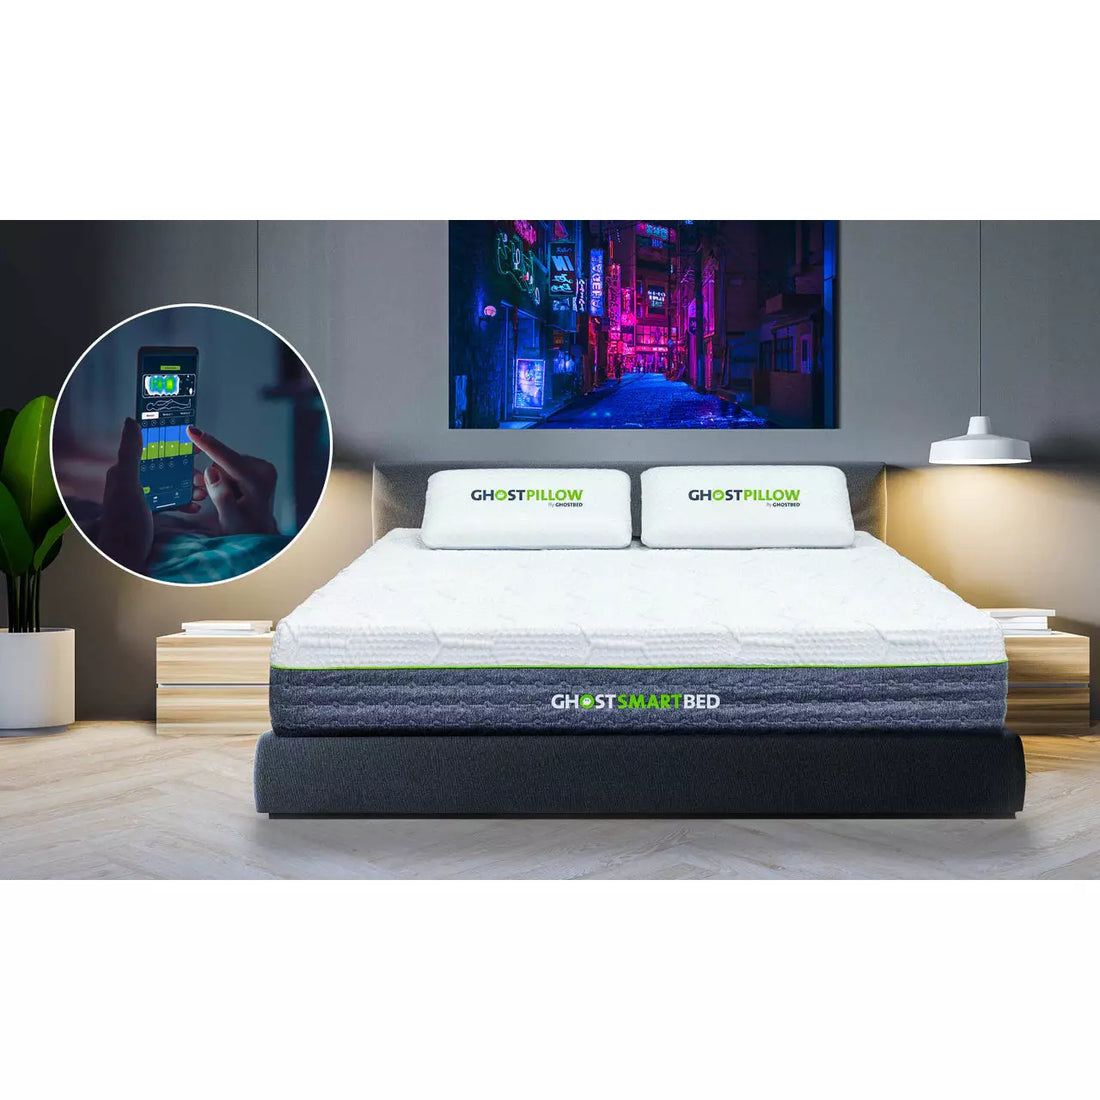 Life Just Got Smarter with GhostBed Smartbed Mattresses